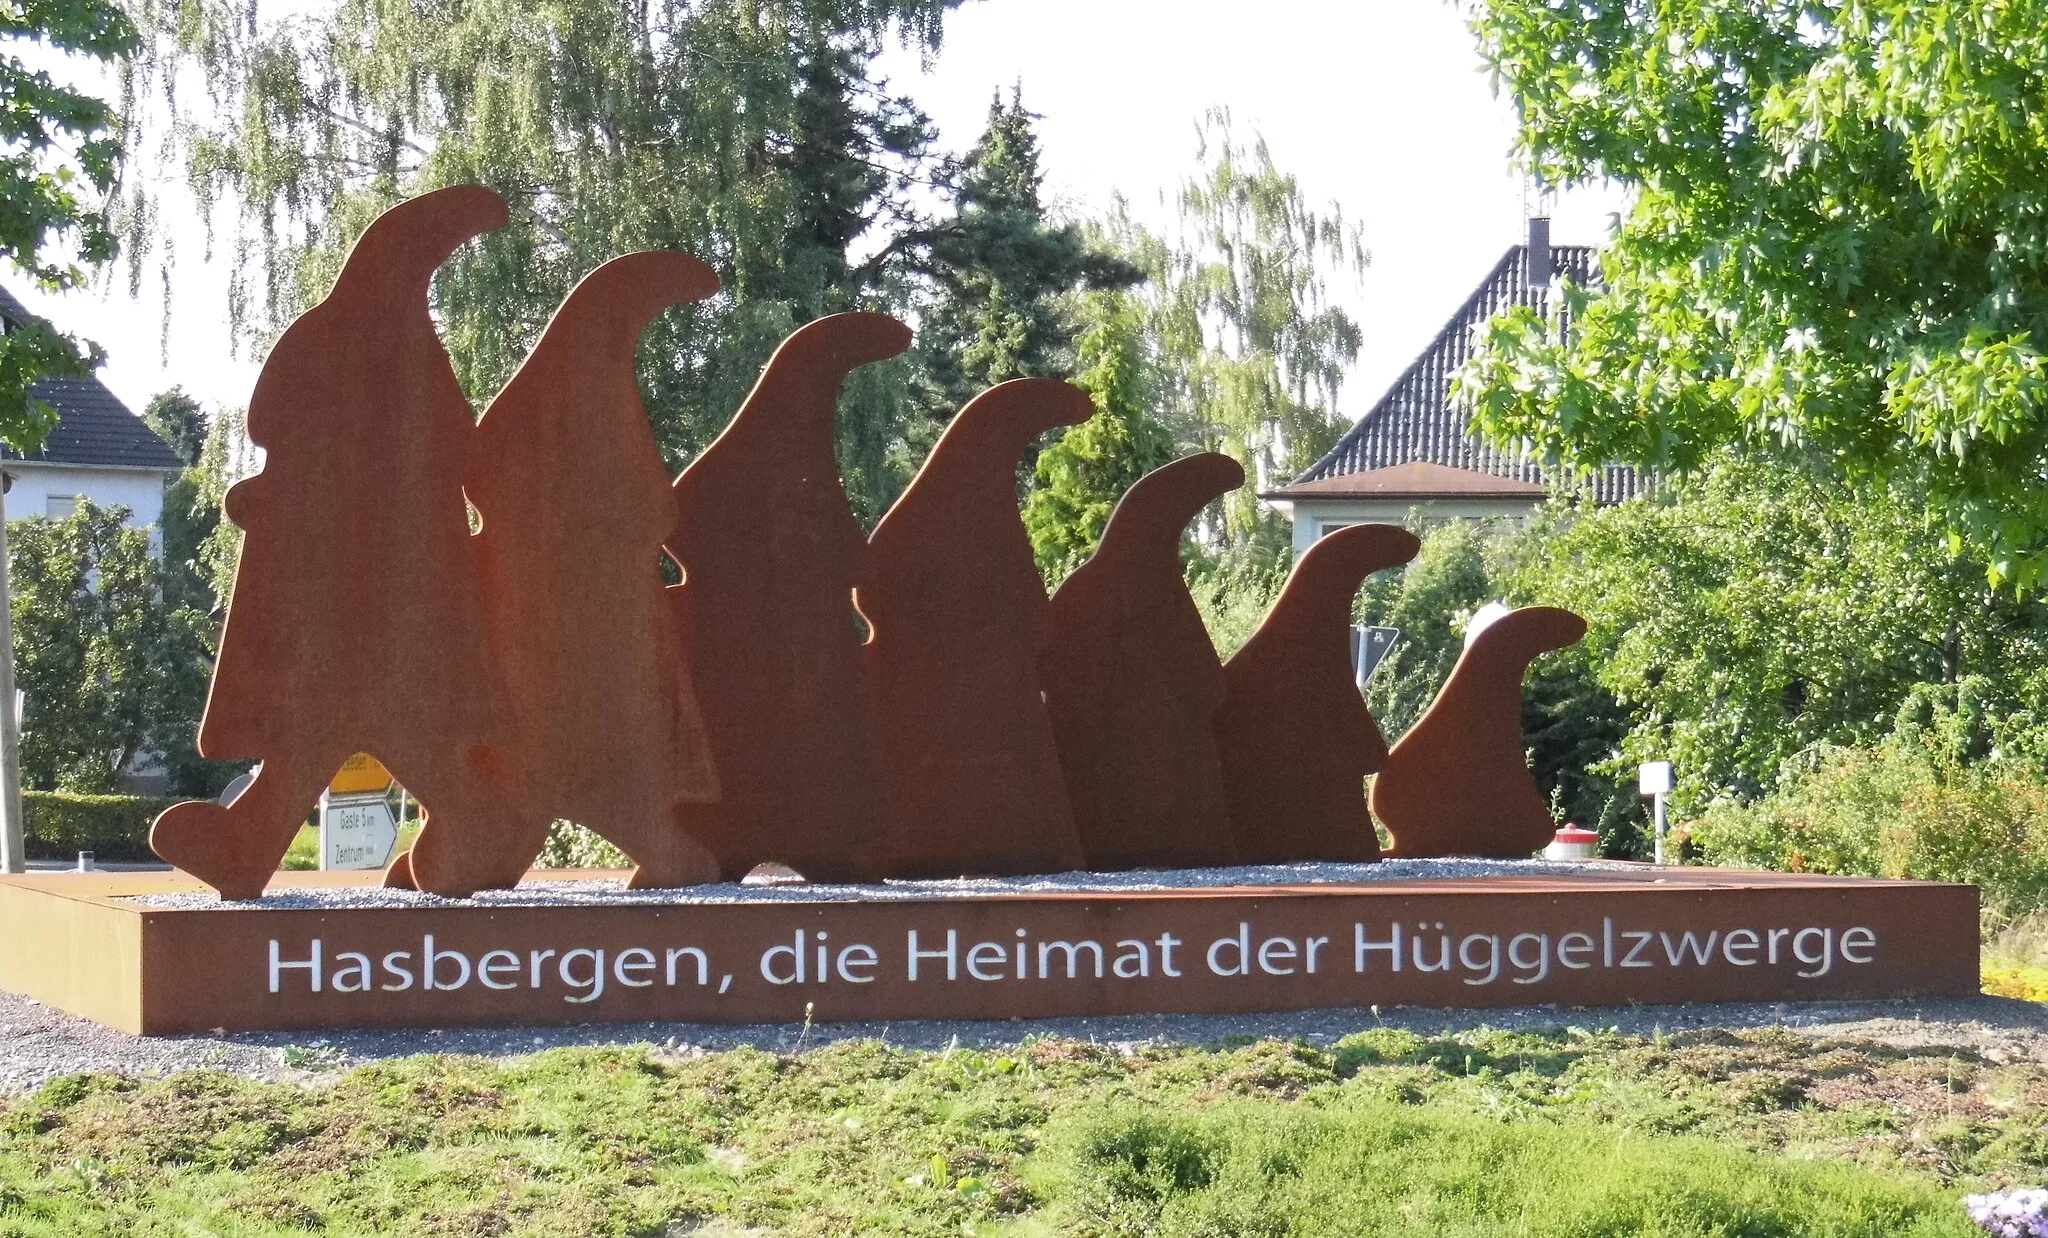 Photo showing: Sculpture on a central island in a roundabout in Hasbergen, Germany